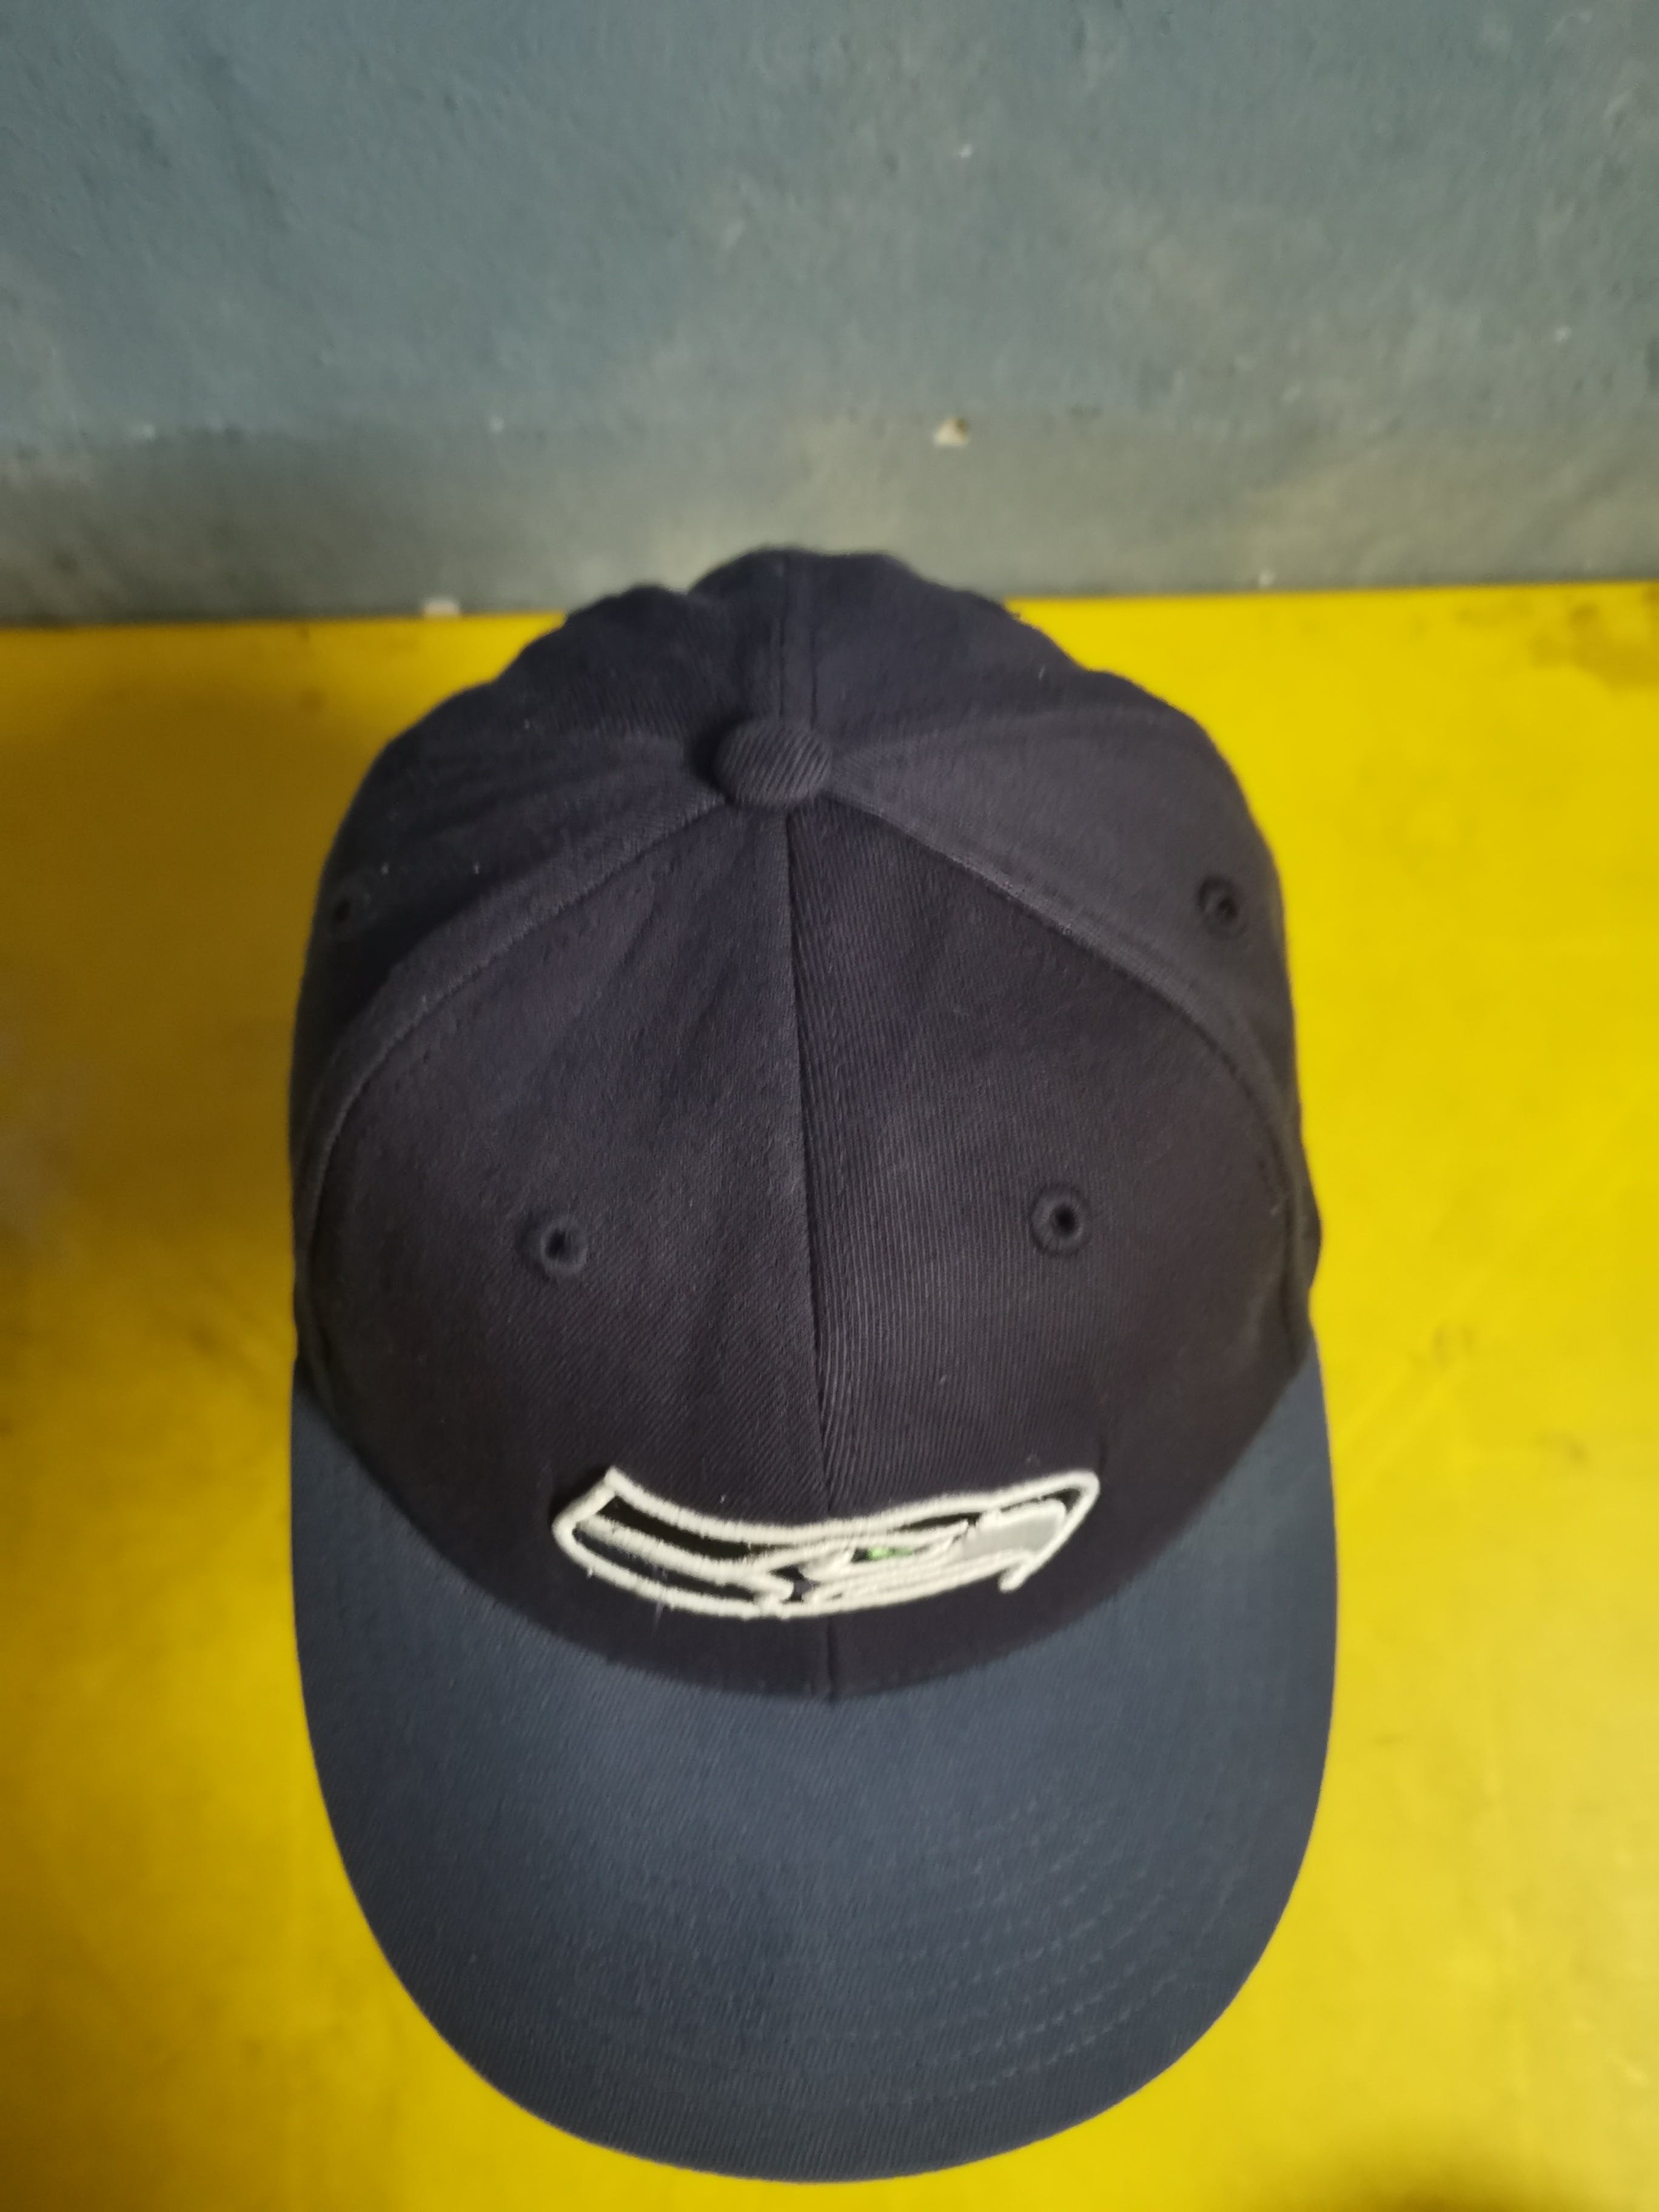 NFL Fullcap Embroidery By Team Apparel Reebok - 8